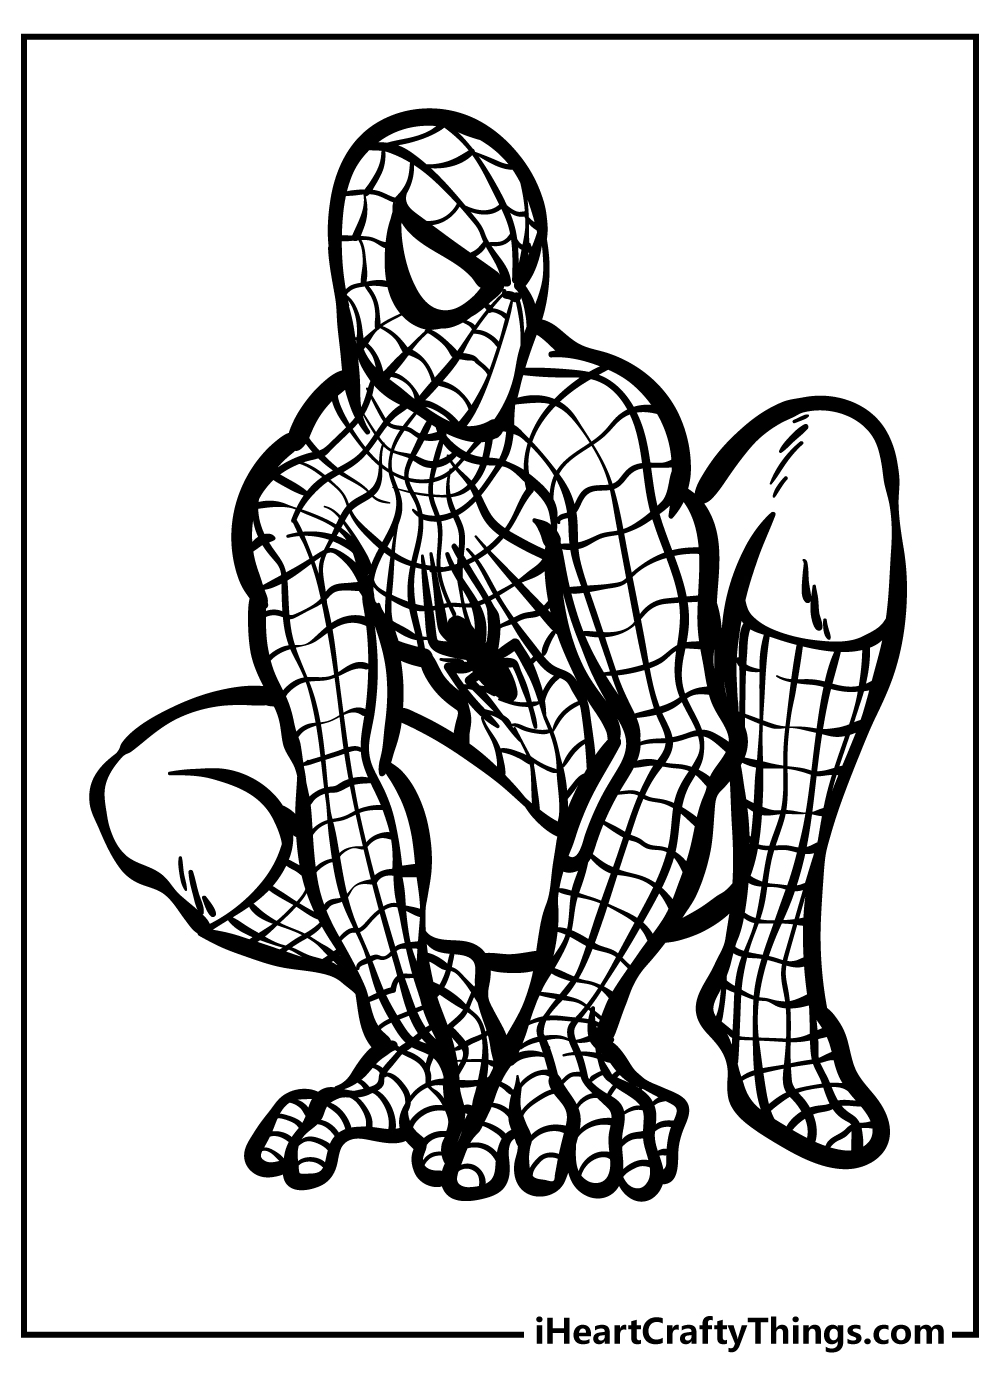 spiderman coloring pages,spider man miles morales,spiderman 2002,spider man 2,spider man 3,spider man no way home